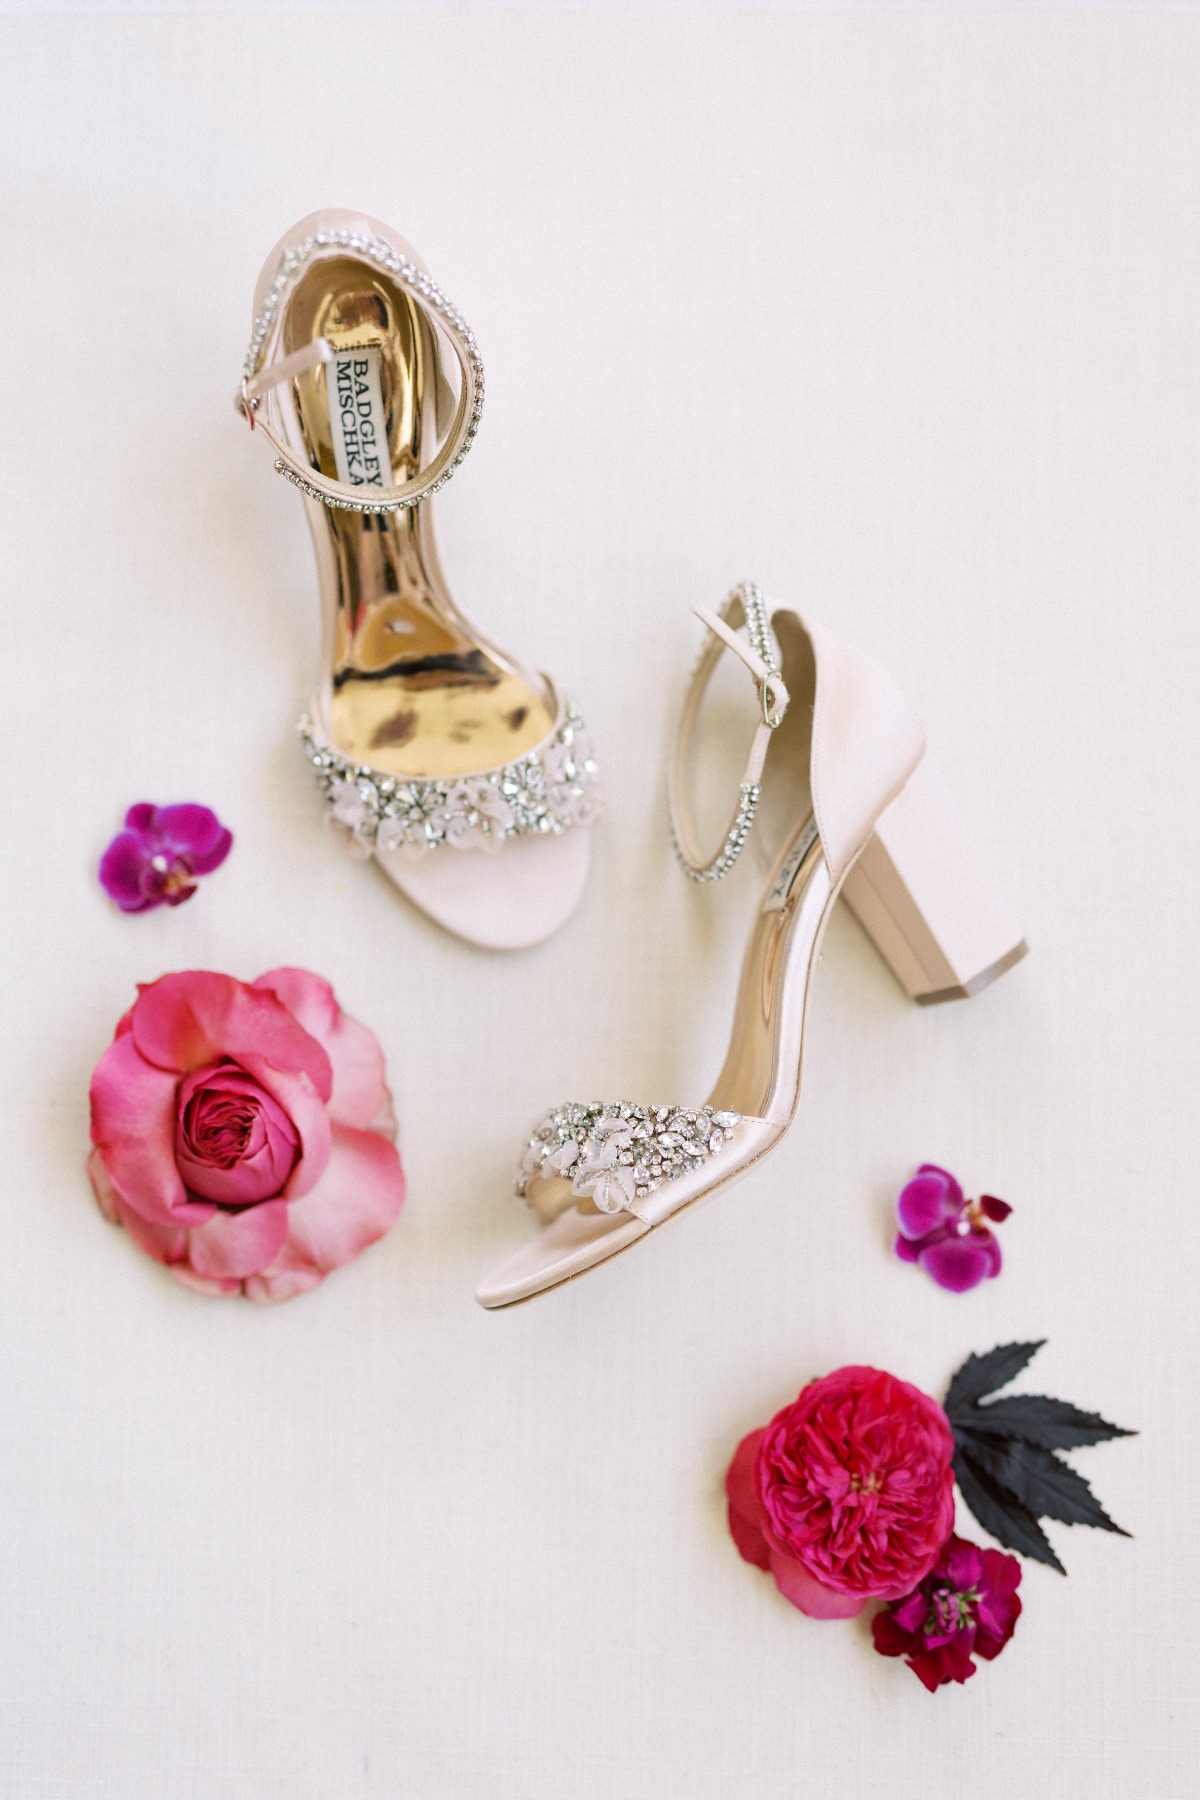 Aerial photo of Badgley Mischka shoes with flowers